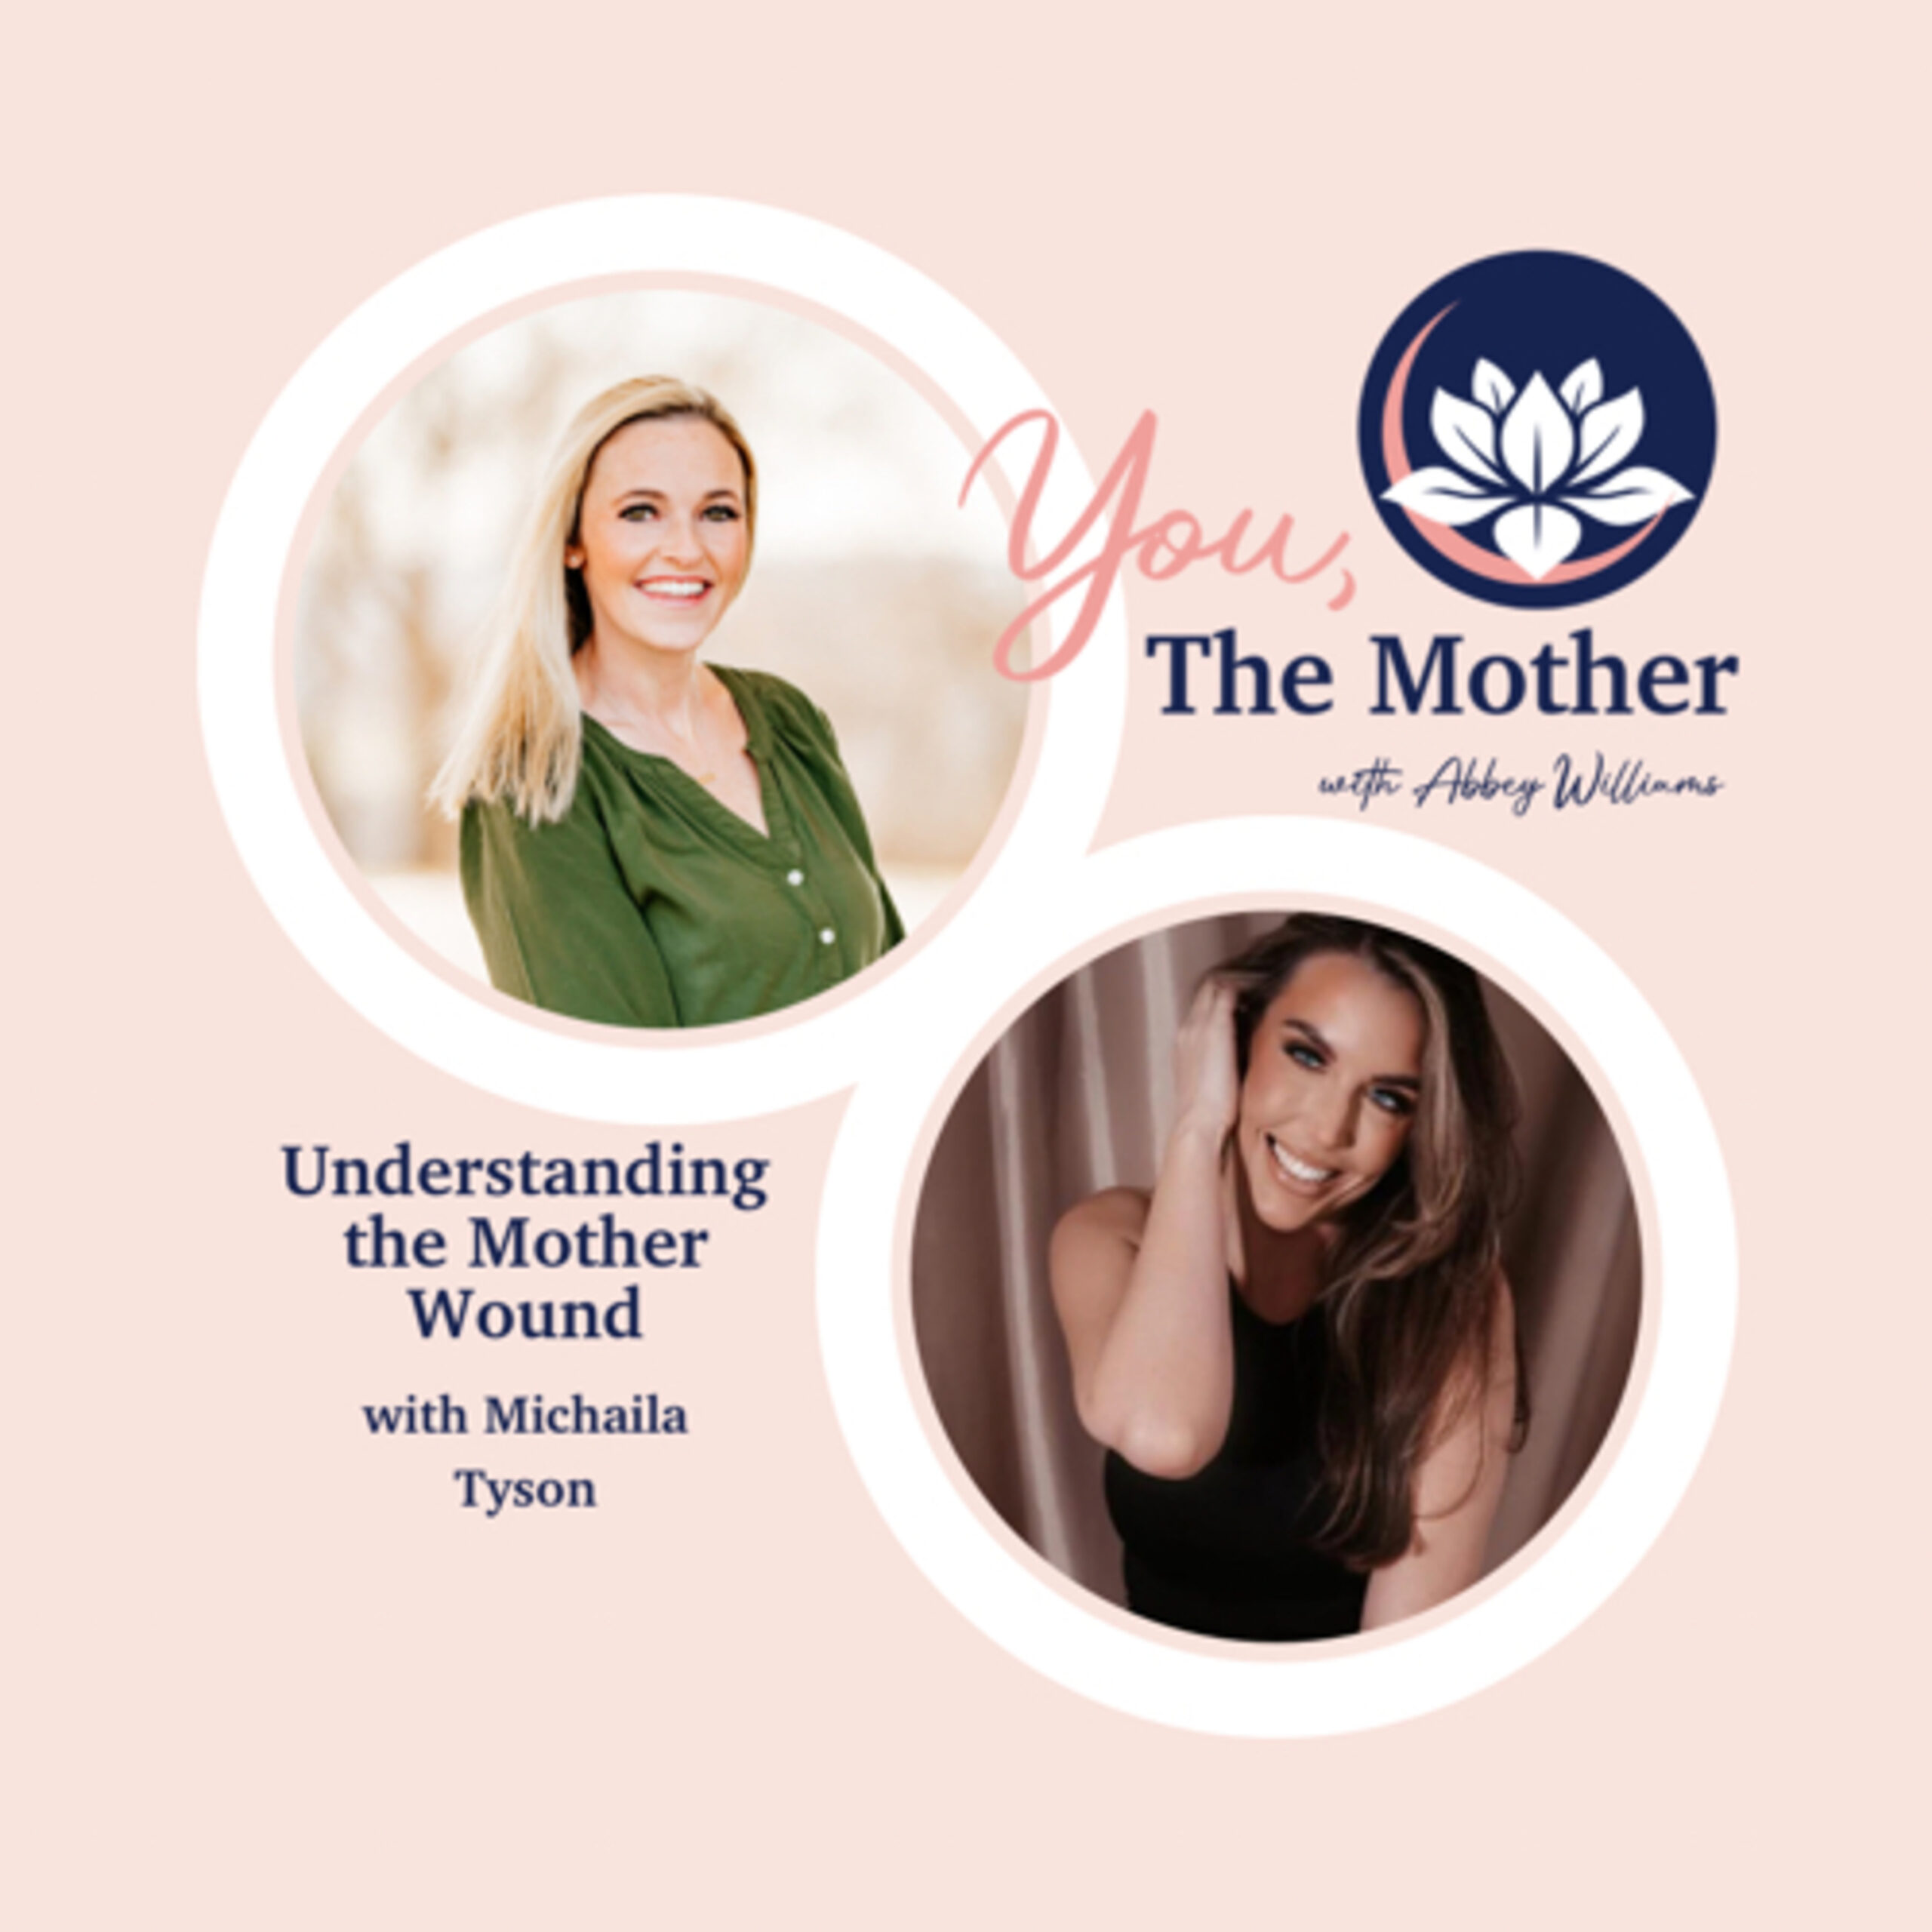 Understanding the Mother Wound with Michaila Tyson